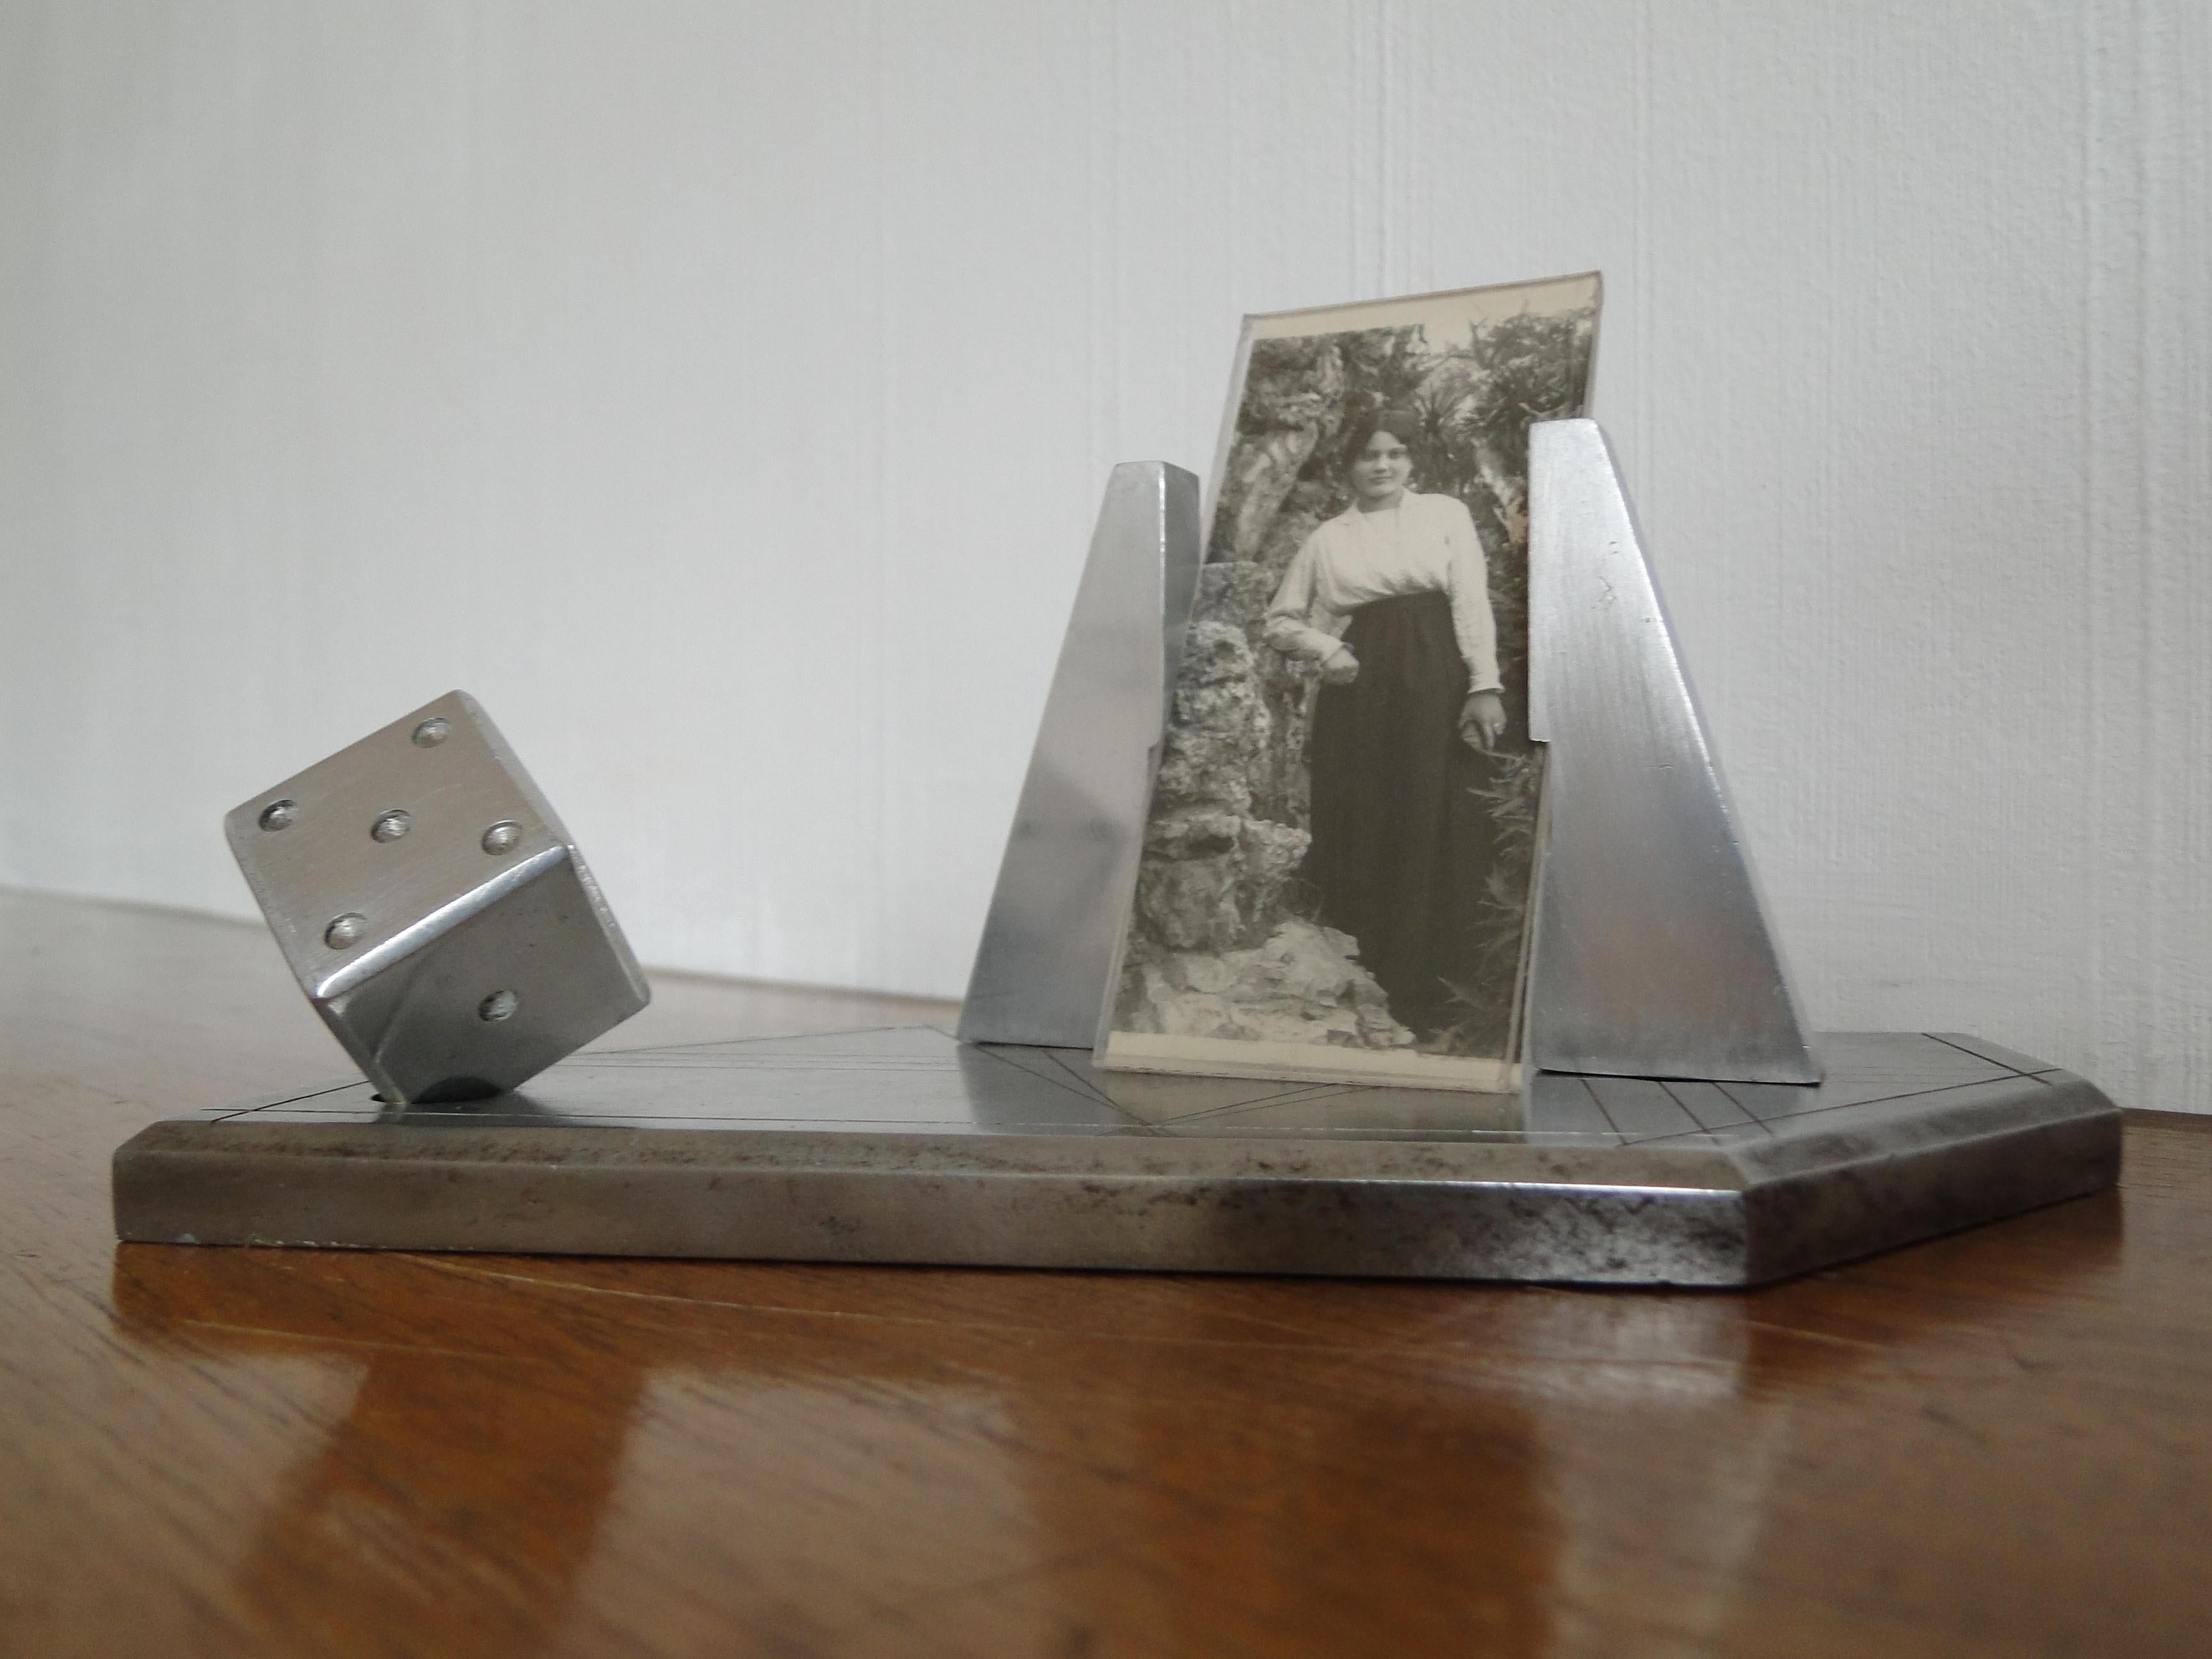 Rare for collector metal and aluminum photo frame of the 1930s France with a dice.
Very nice item.
Good condition.